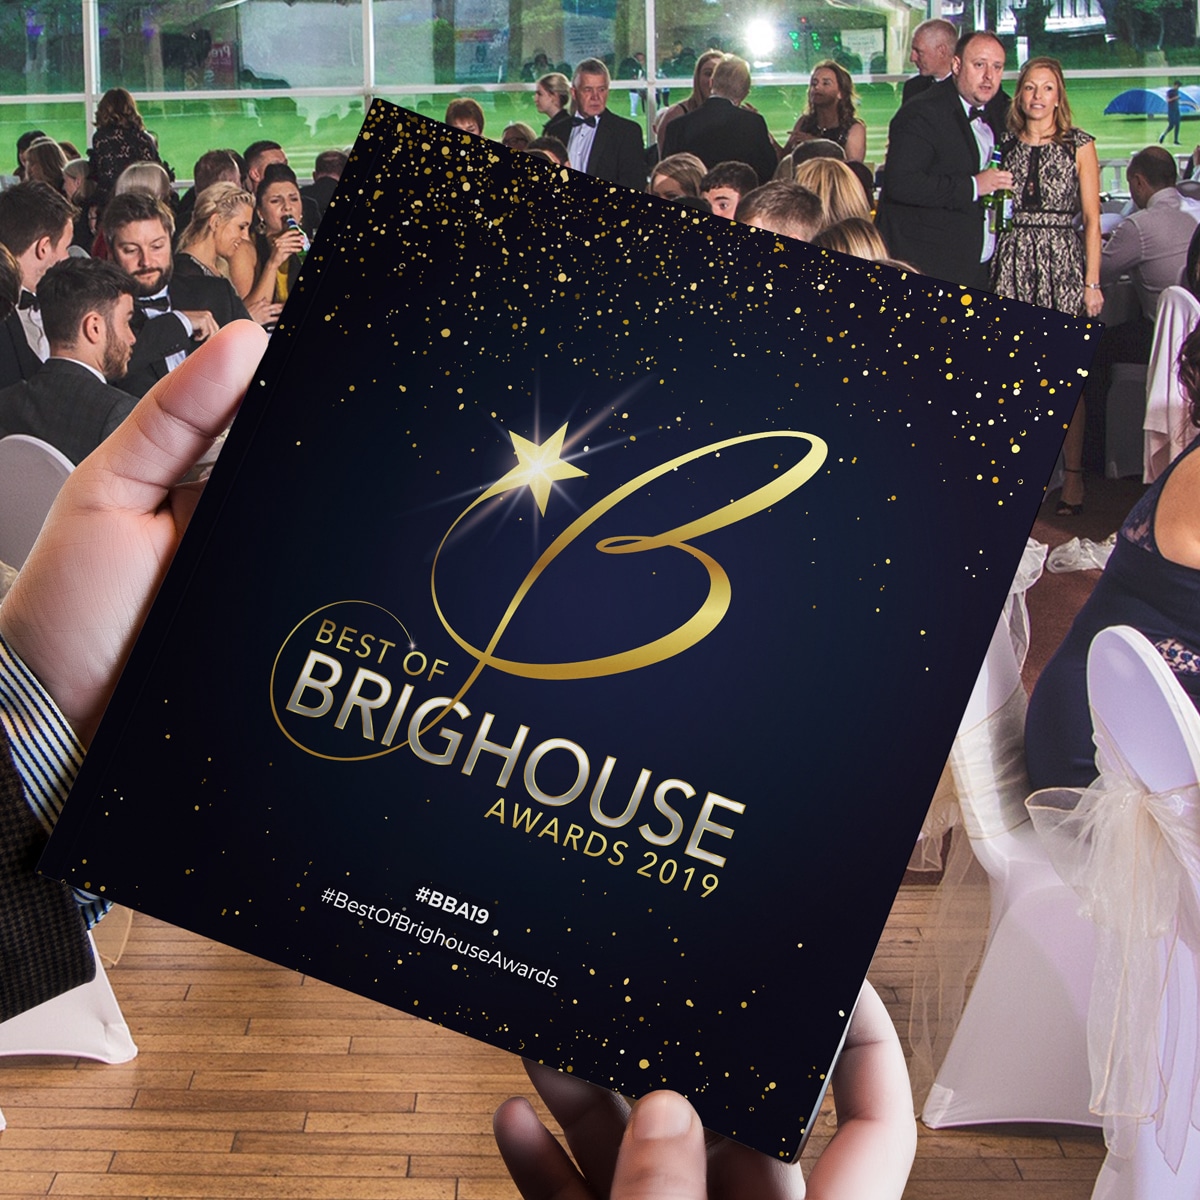 Best-of-Brighouse Awards